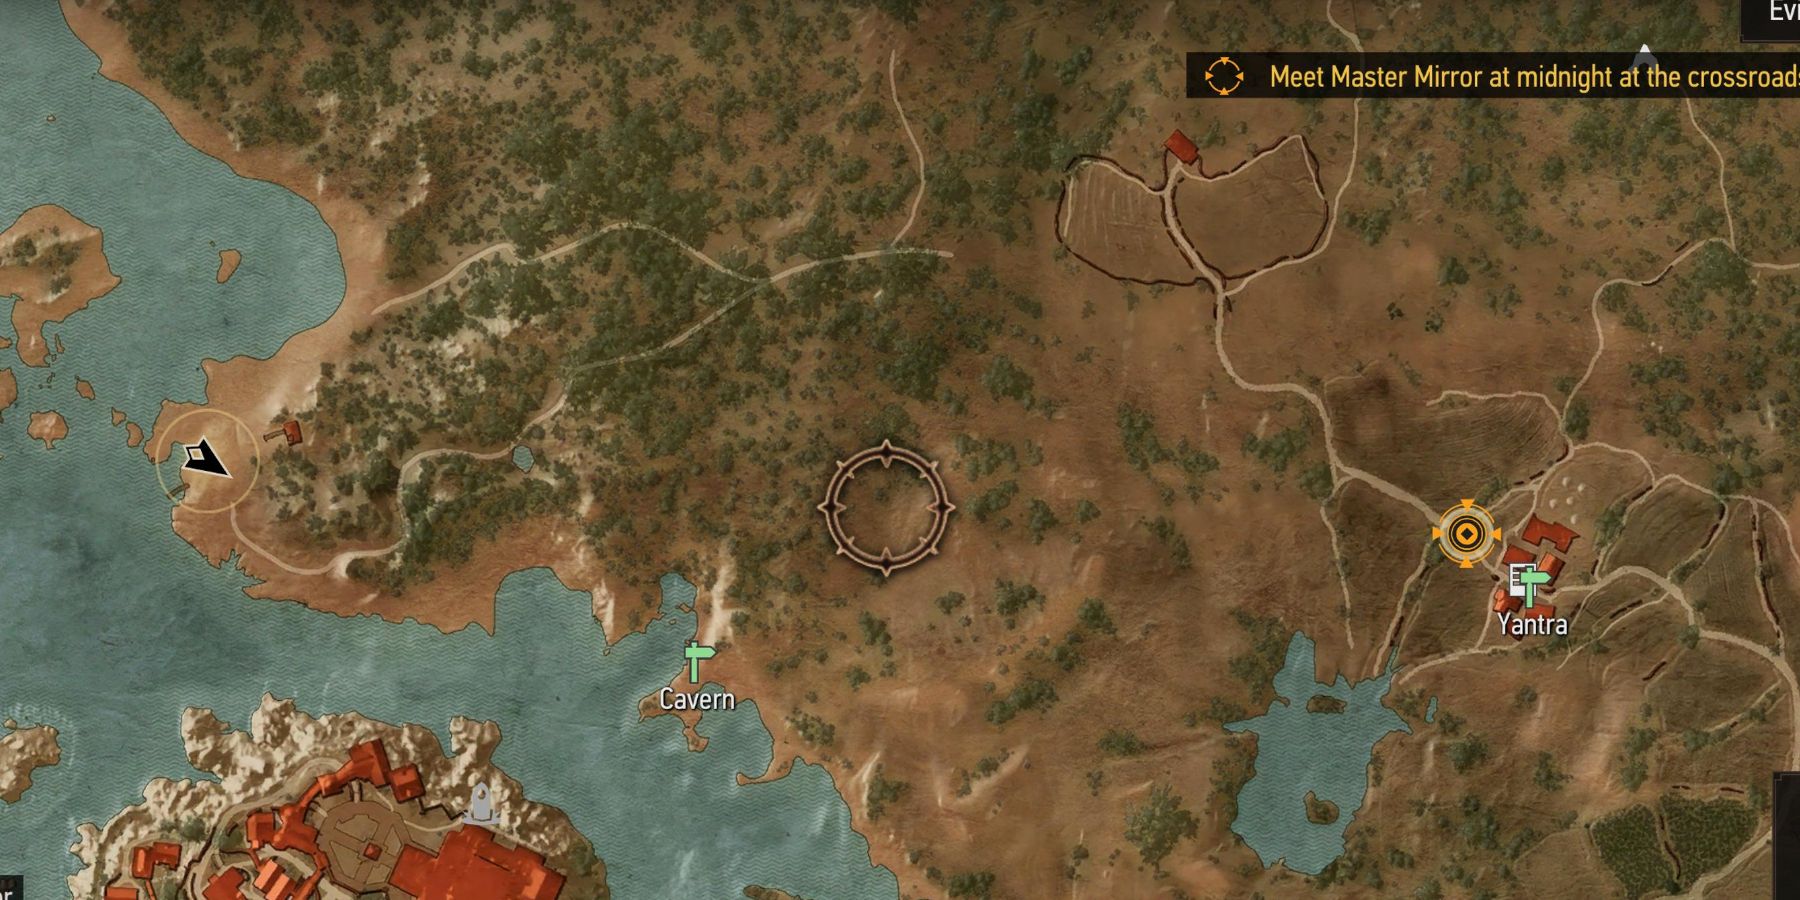 Witcher 3 Master Mirror's location on the map